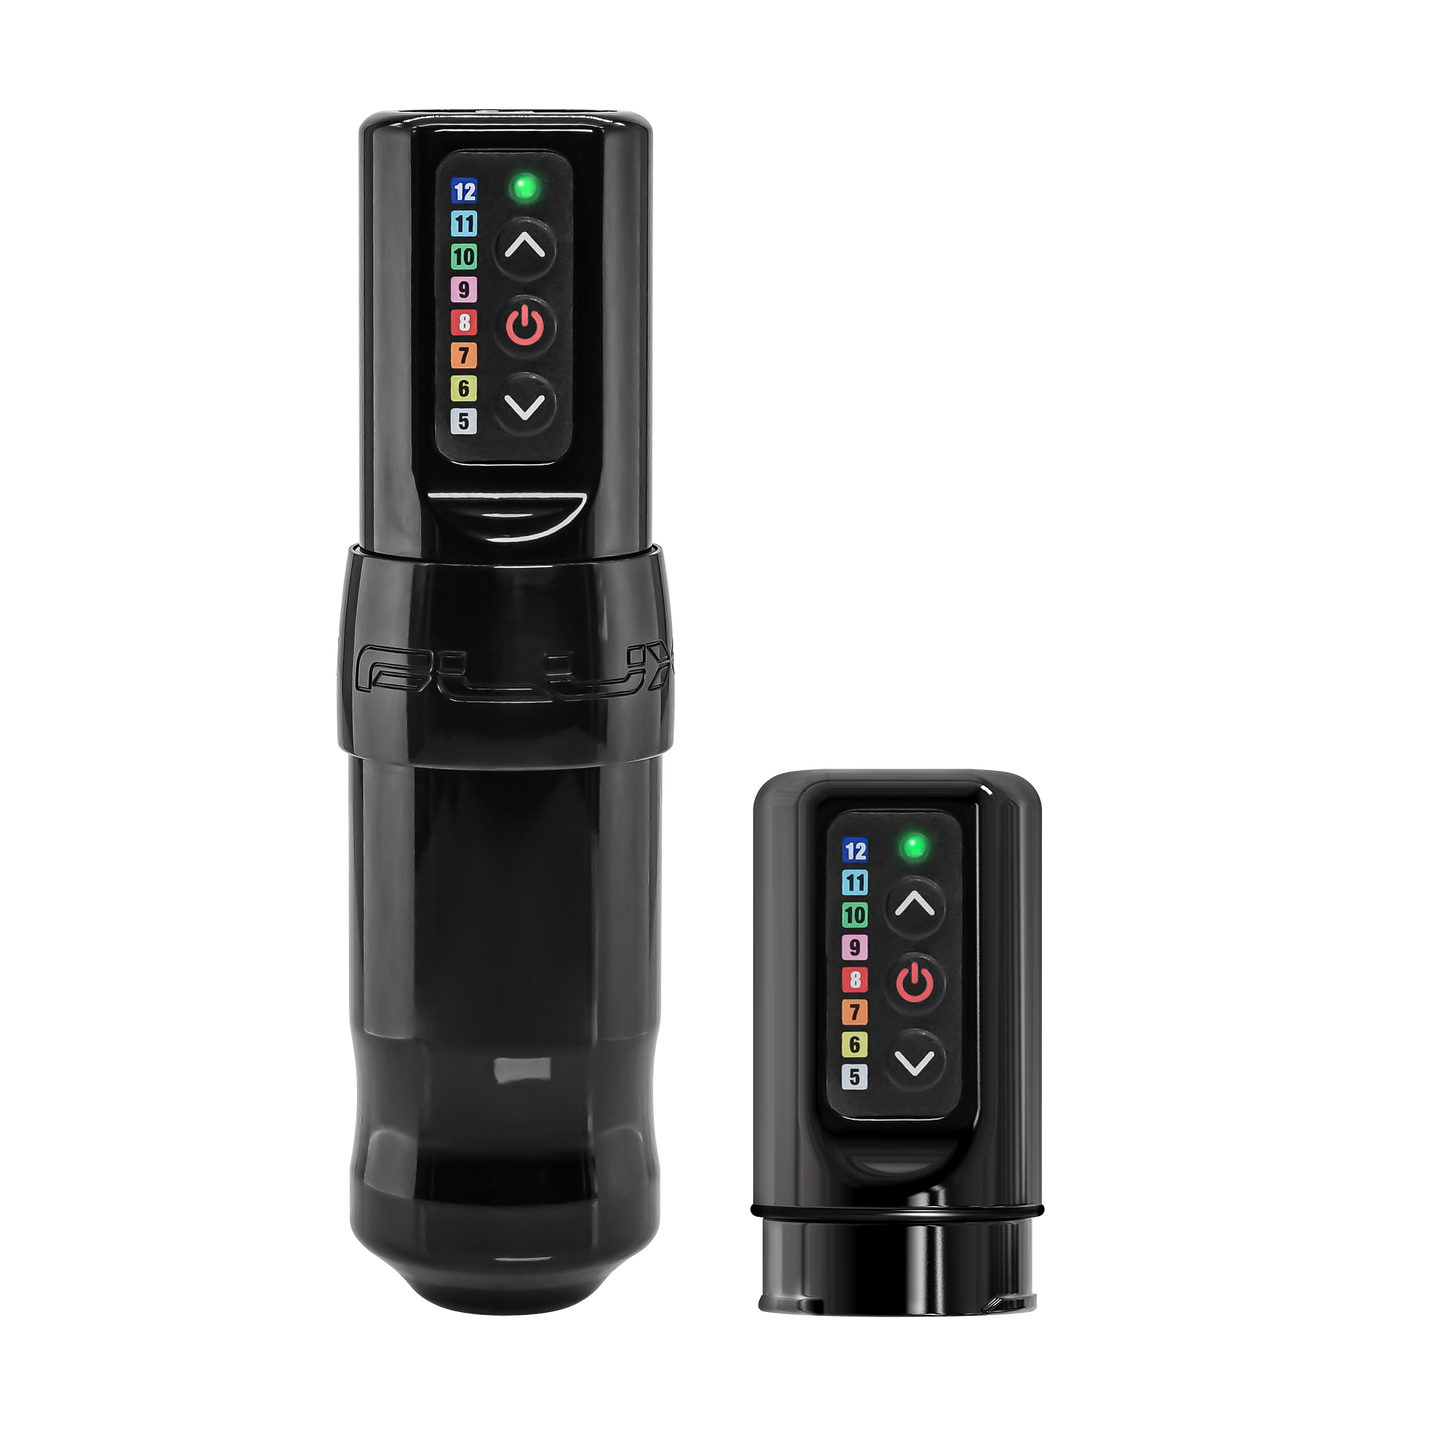 Wireless tattoo machine, the Spektra Flux, shown with an extra battery pack